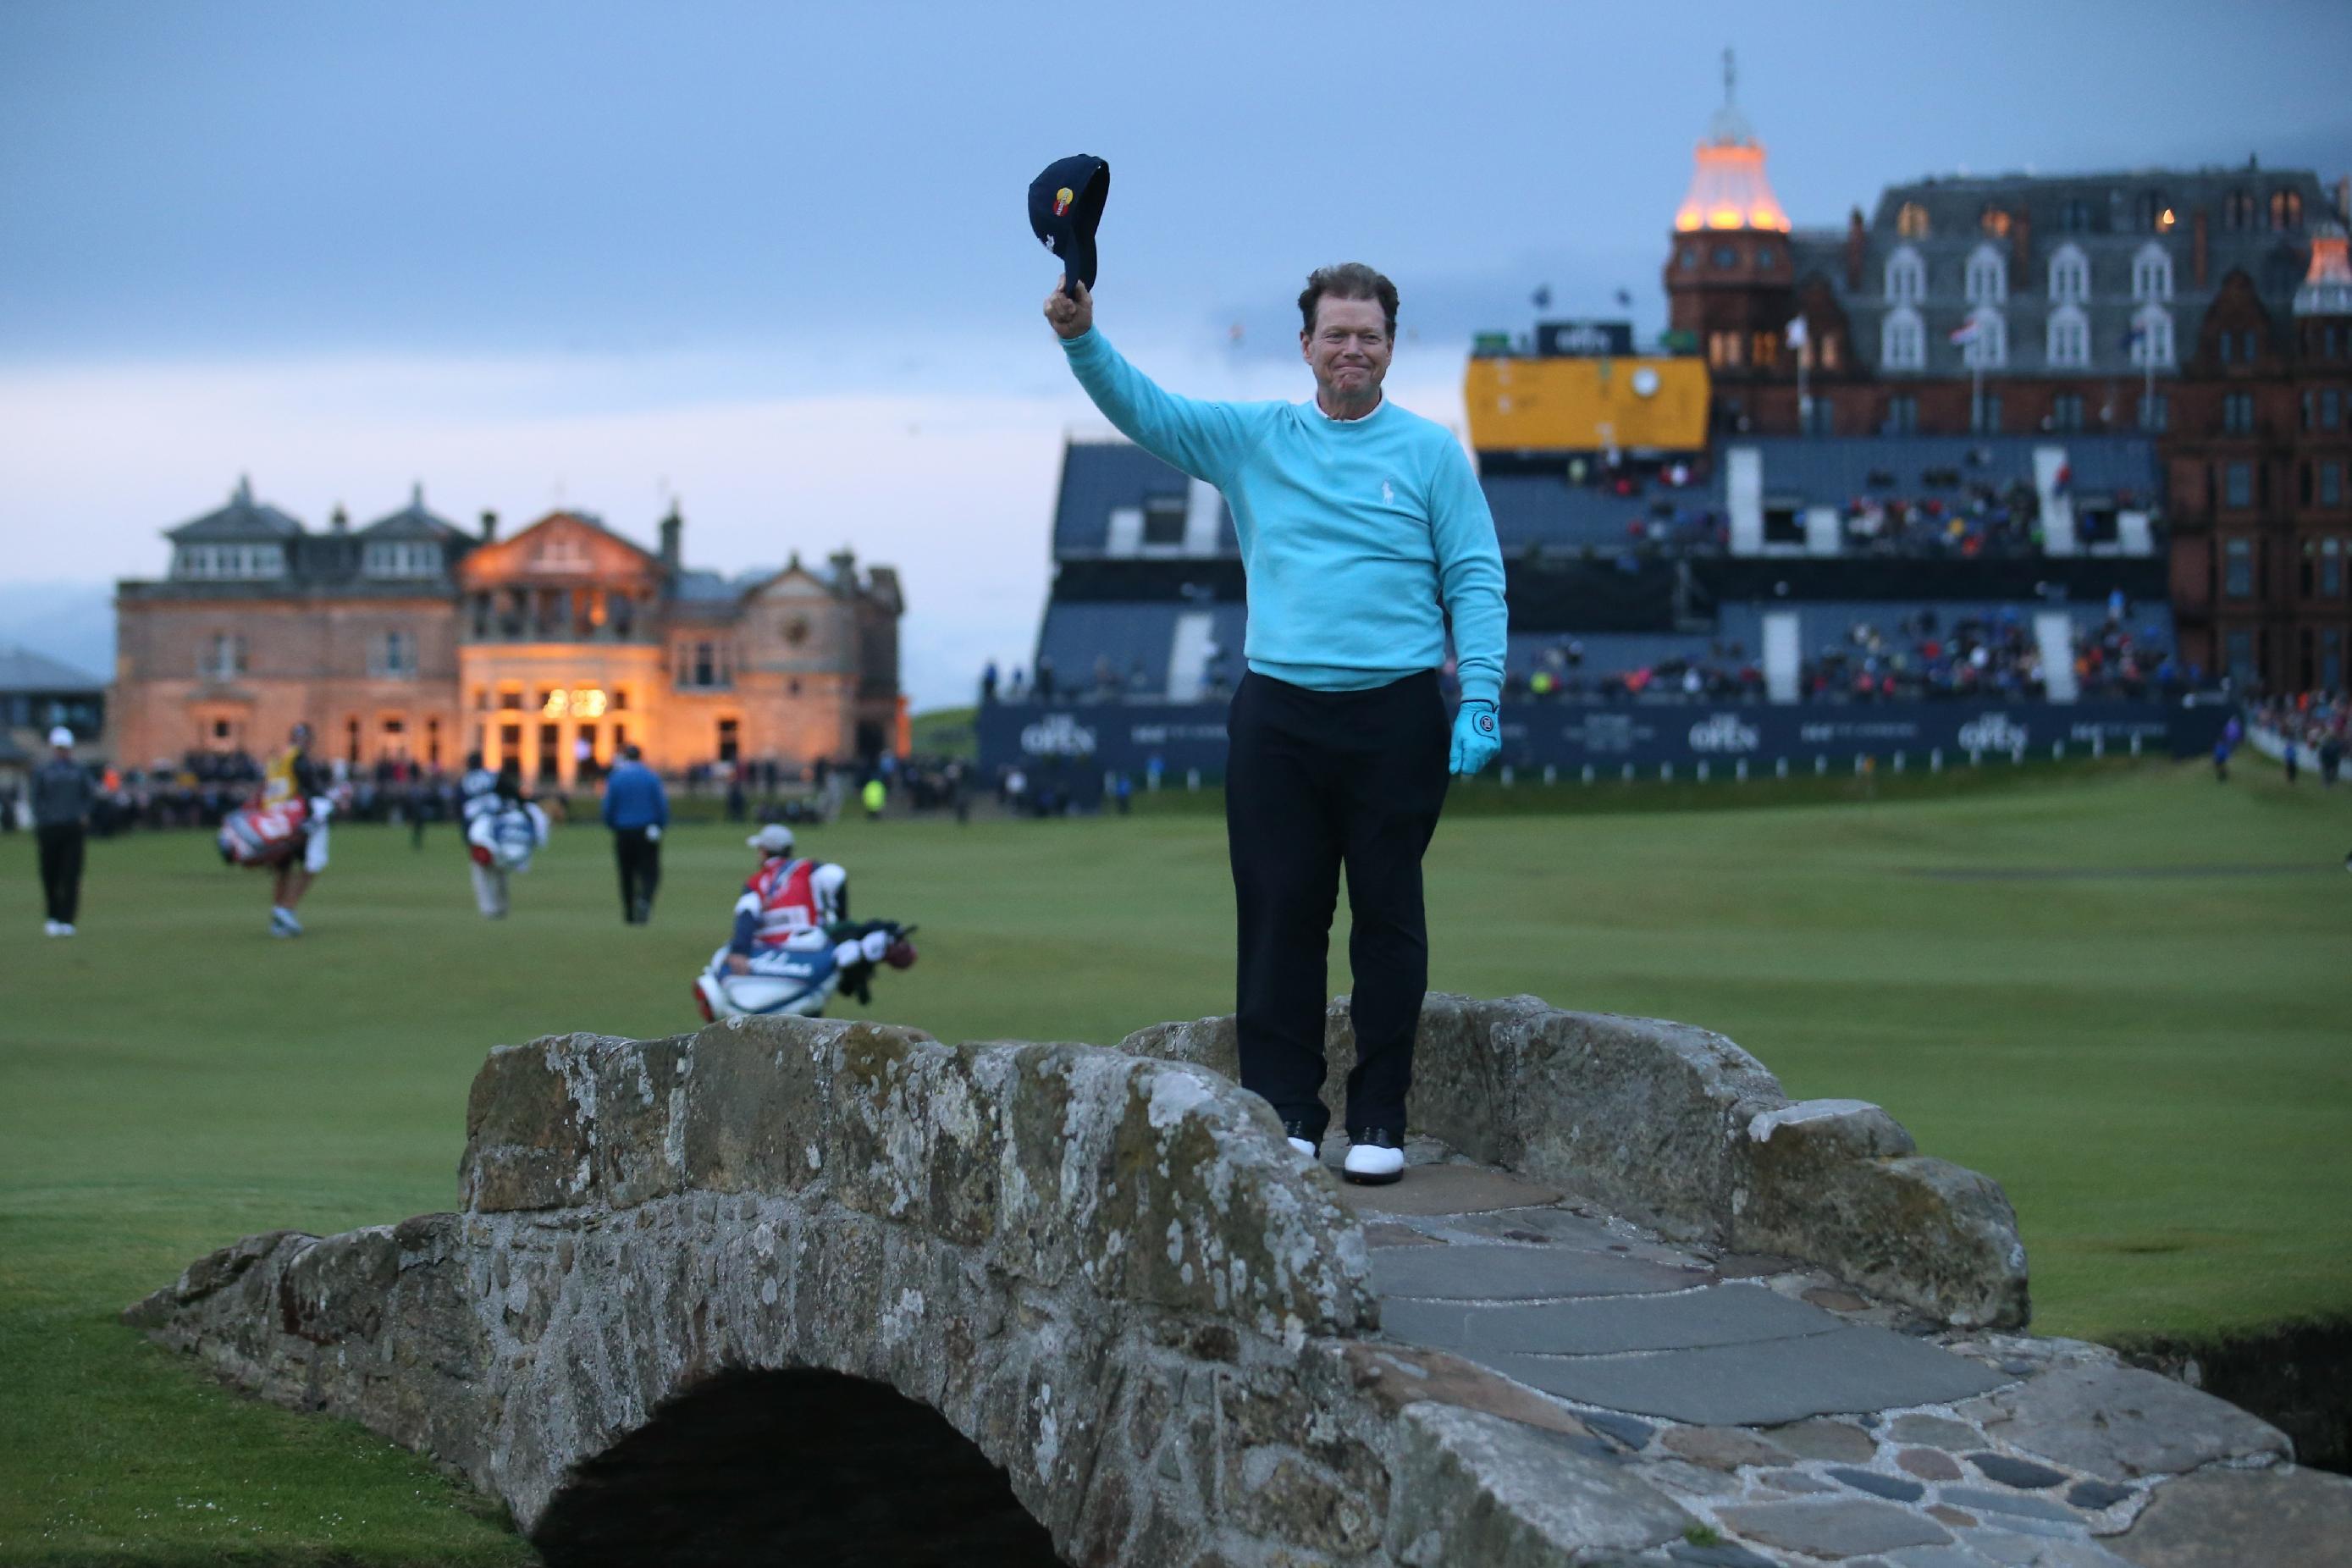 United States' Tom Watson doffs his cap as he poses on the Swilcan Bridge for photographers during the second round of the British Open Golf Championship at the Old Course, St. Andrews, Scotland, Friday, July 17, 2015. (AP Photo/Peter Morrison)